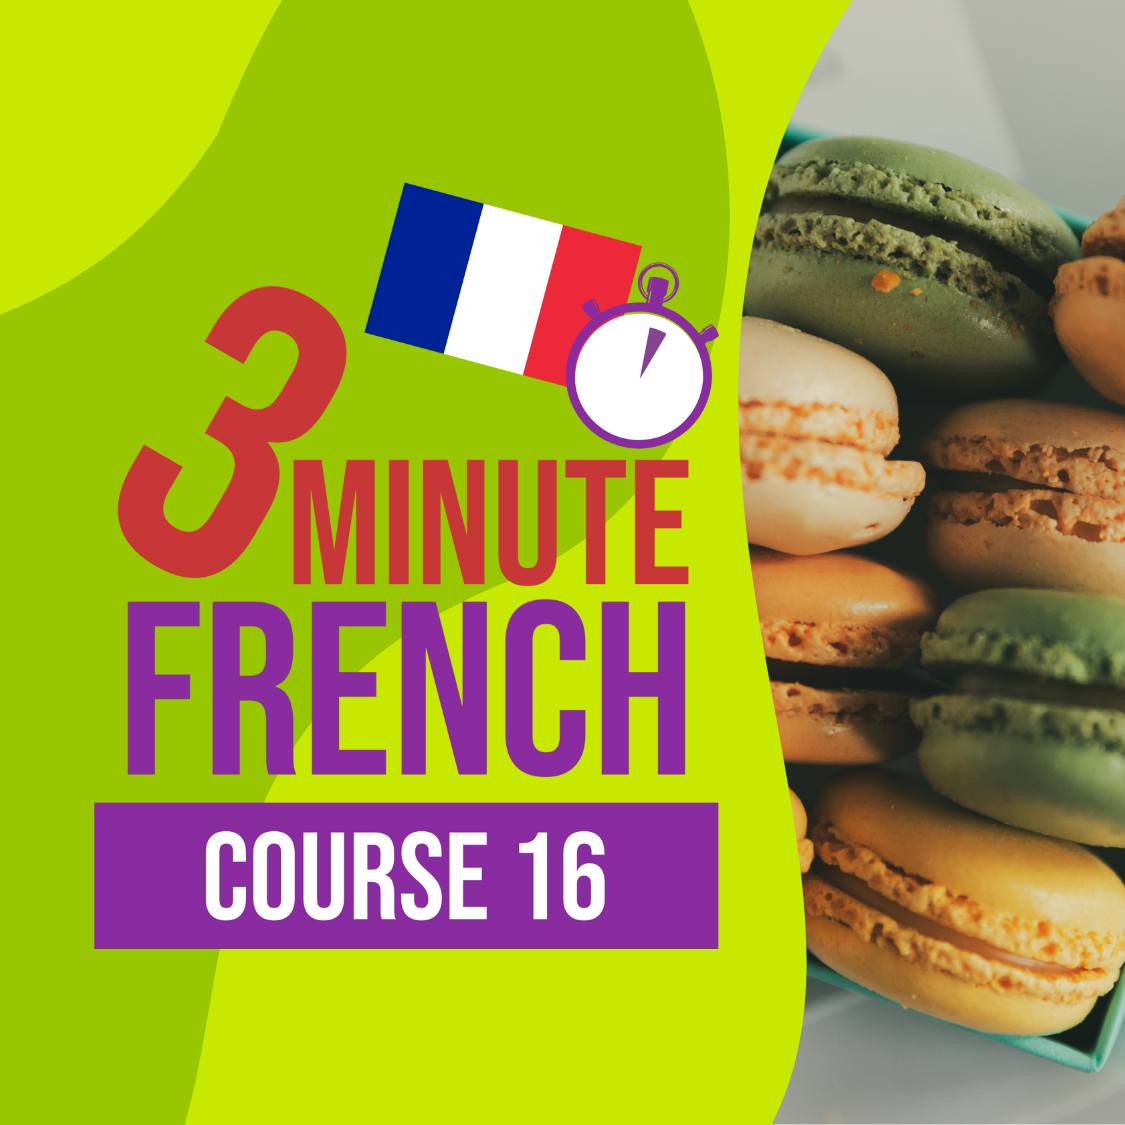 3 Minute French - Course 16